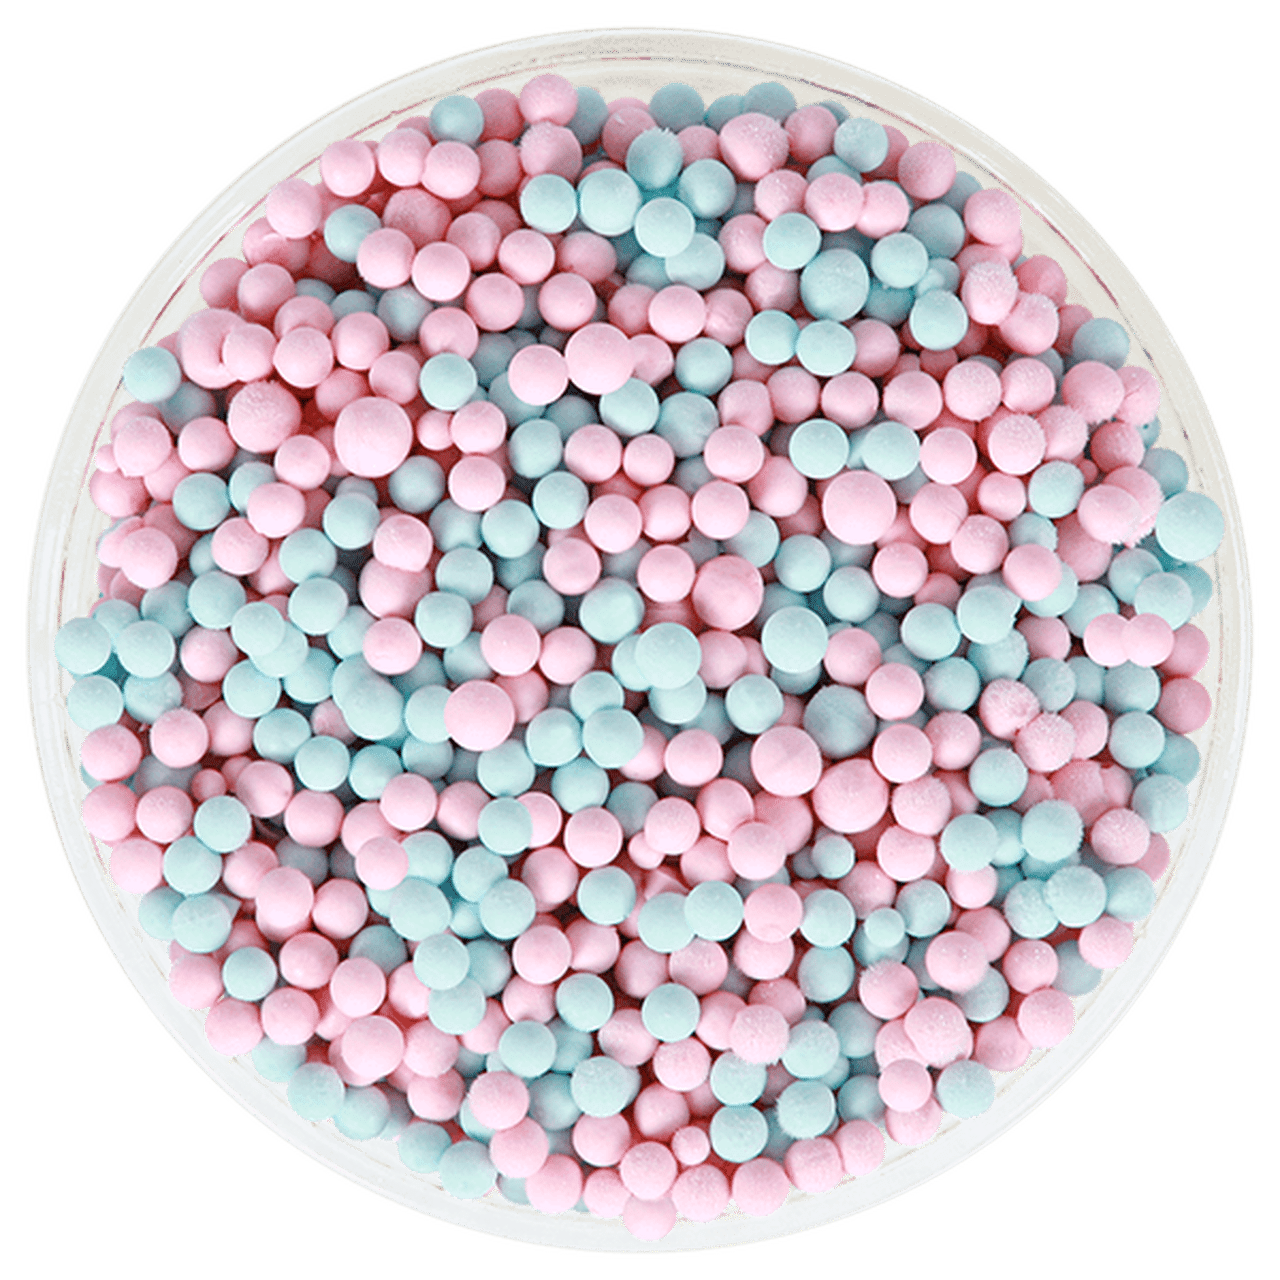 Cotton Candy Ice Cream Dippin' Dots Food Truck